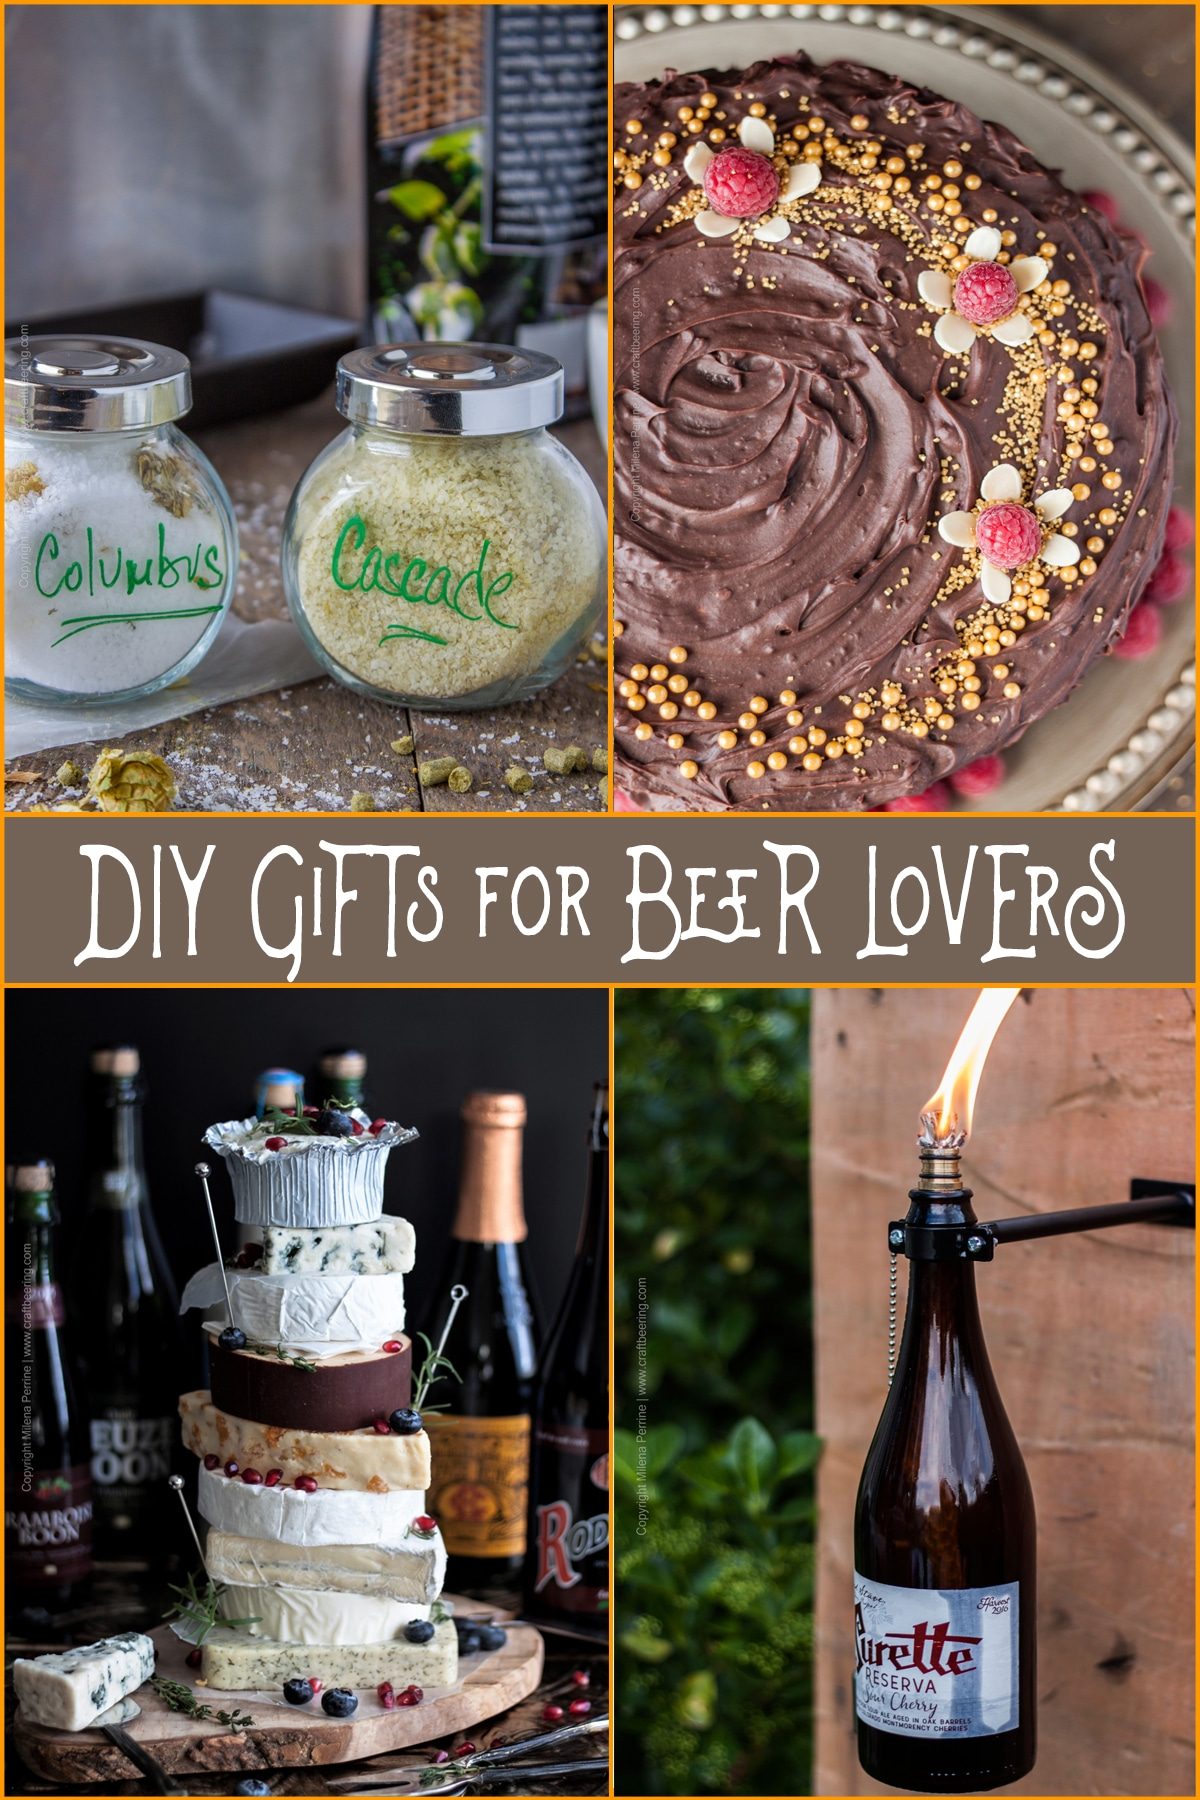 DIY Gifts for Beer Lovers | Beer themed gifts you can make that they will love! Beer cake, beer bottle tiki torch, beer and cheese pairing, hops salt PLUS MORE! #beergift #beergiftidea #fathersdaygift #birthdaygift